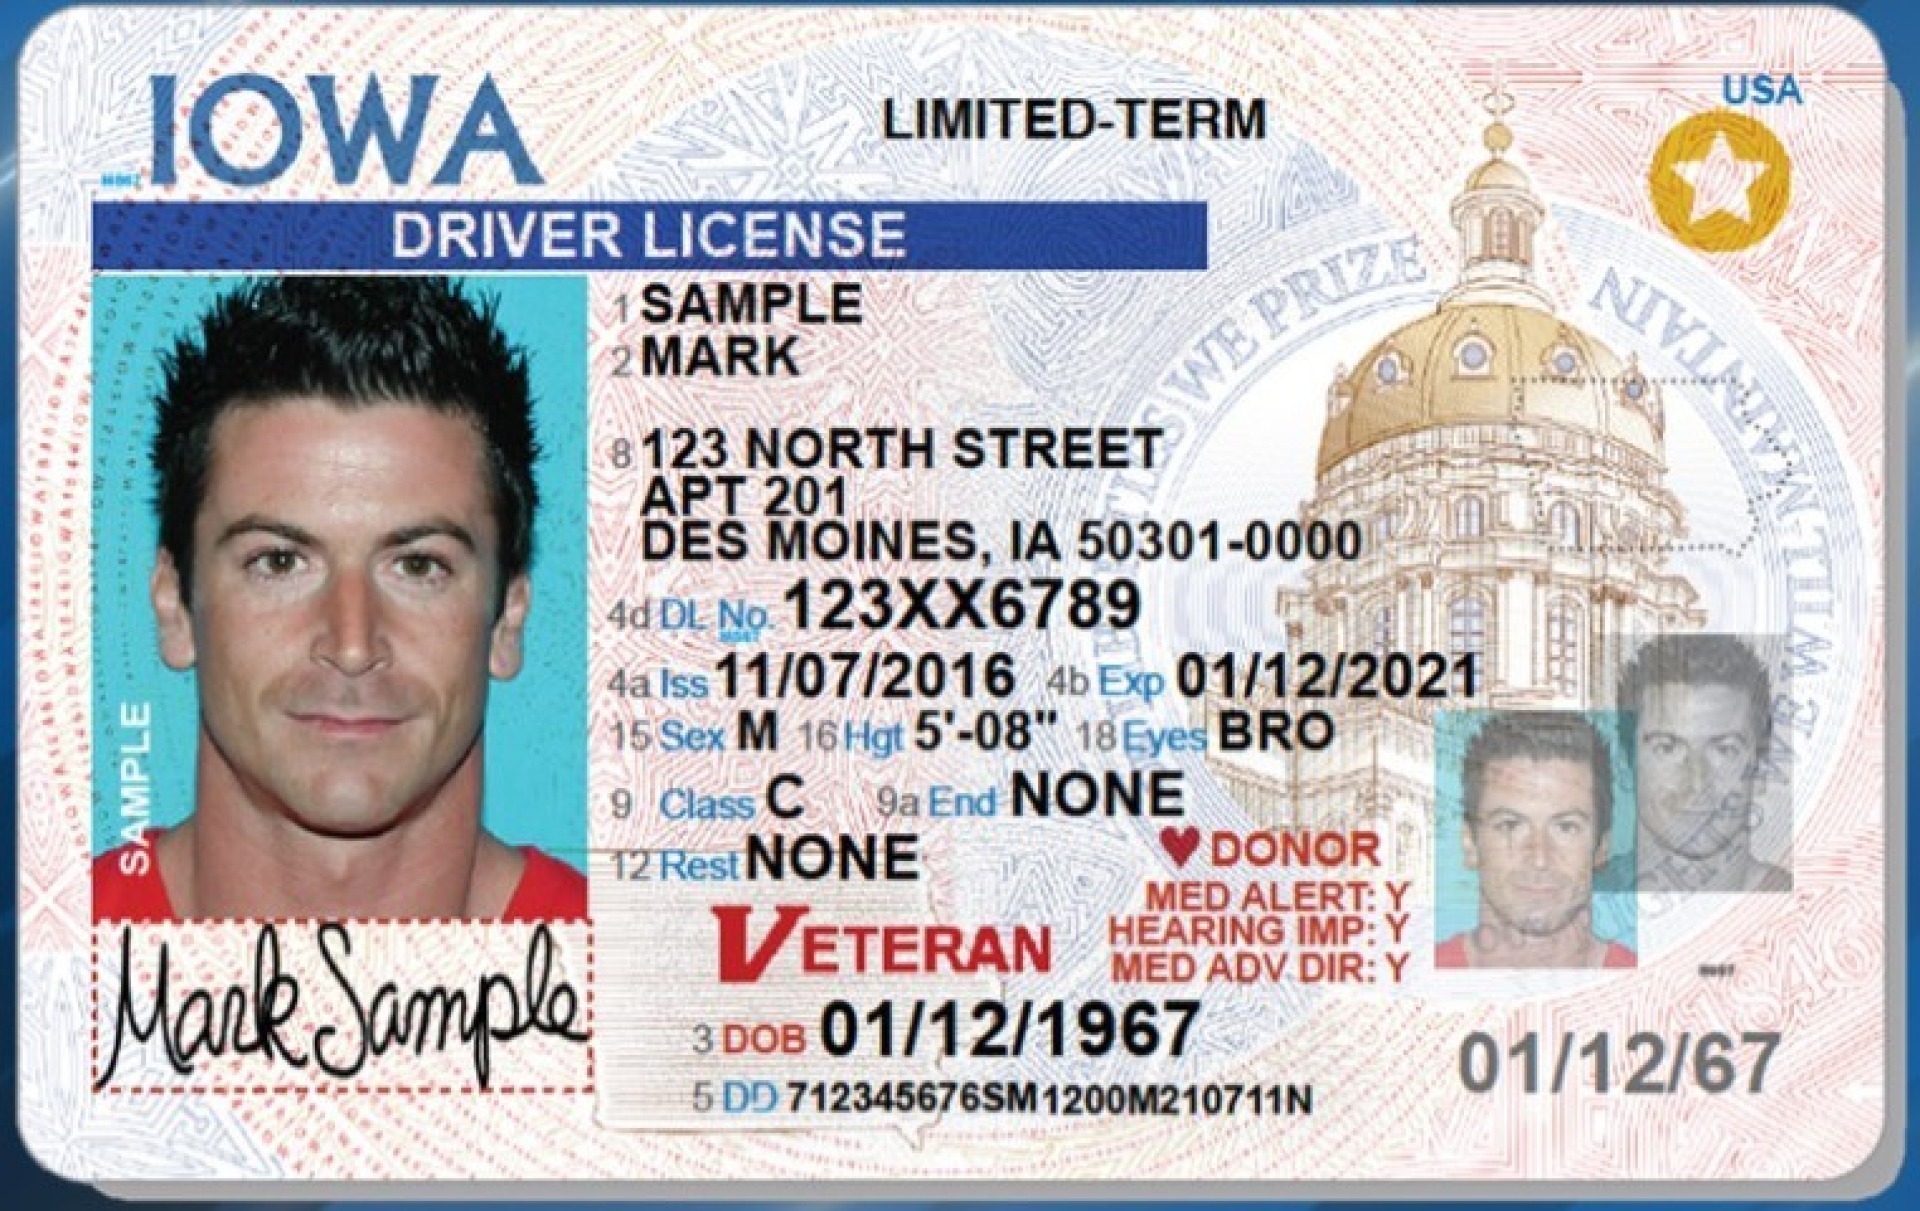 Example of an Iowa drivers license with Veteran designation.